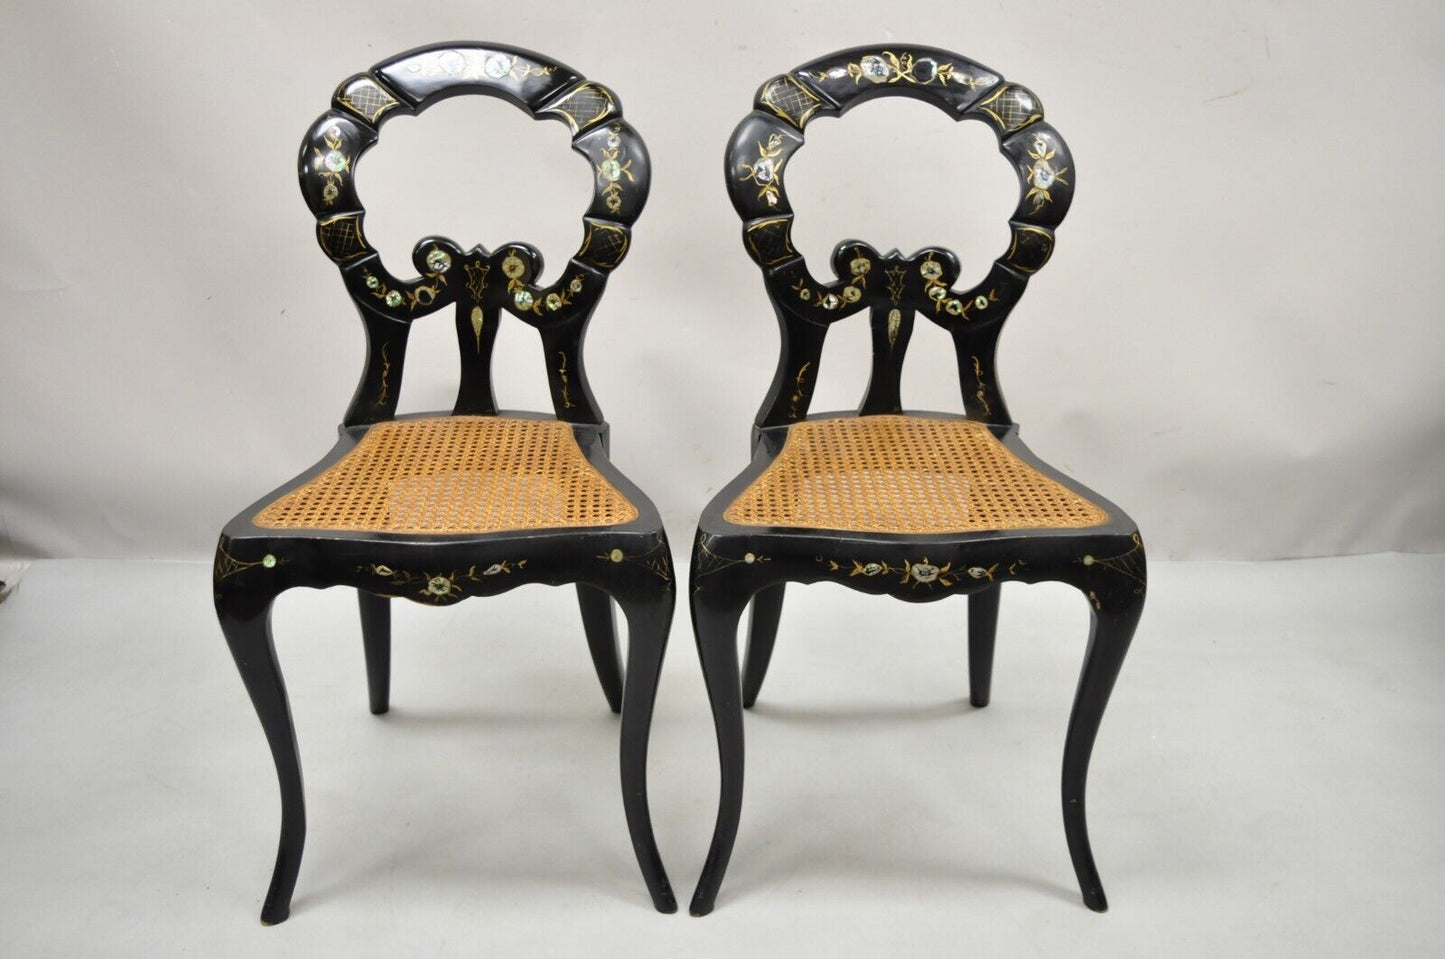 Antique English Regency Mother of Pearl Inlay Black Ebonized Side Chair - a Pair